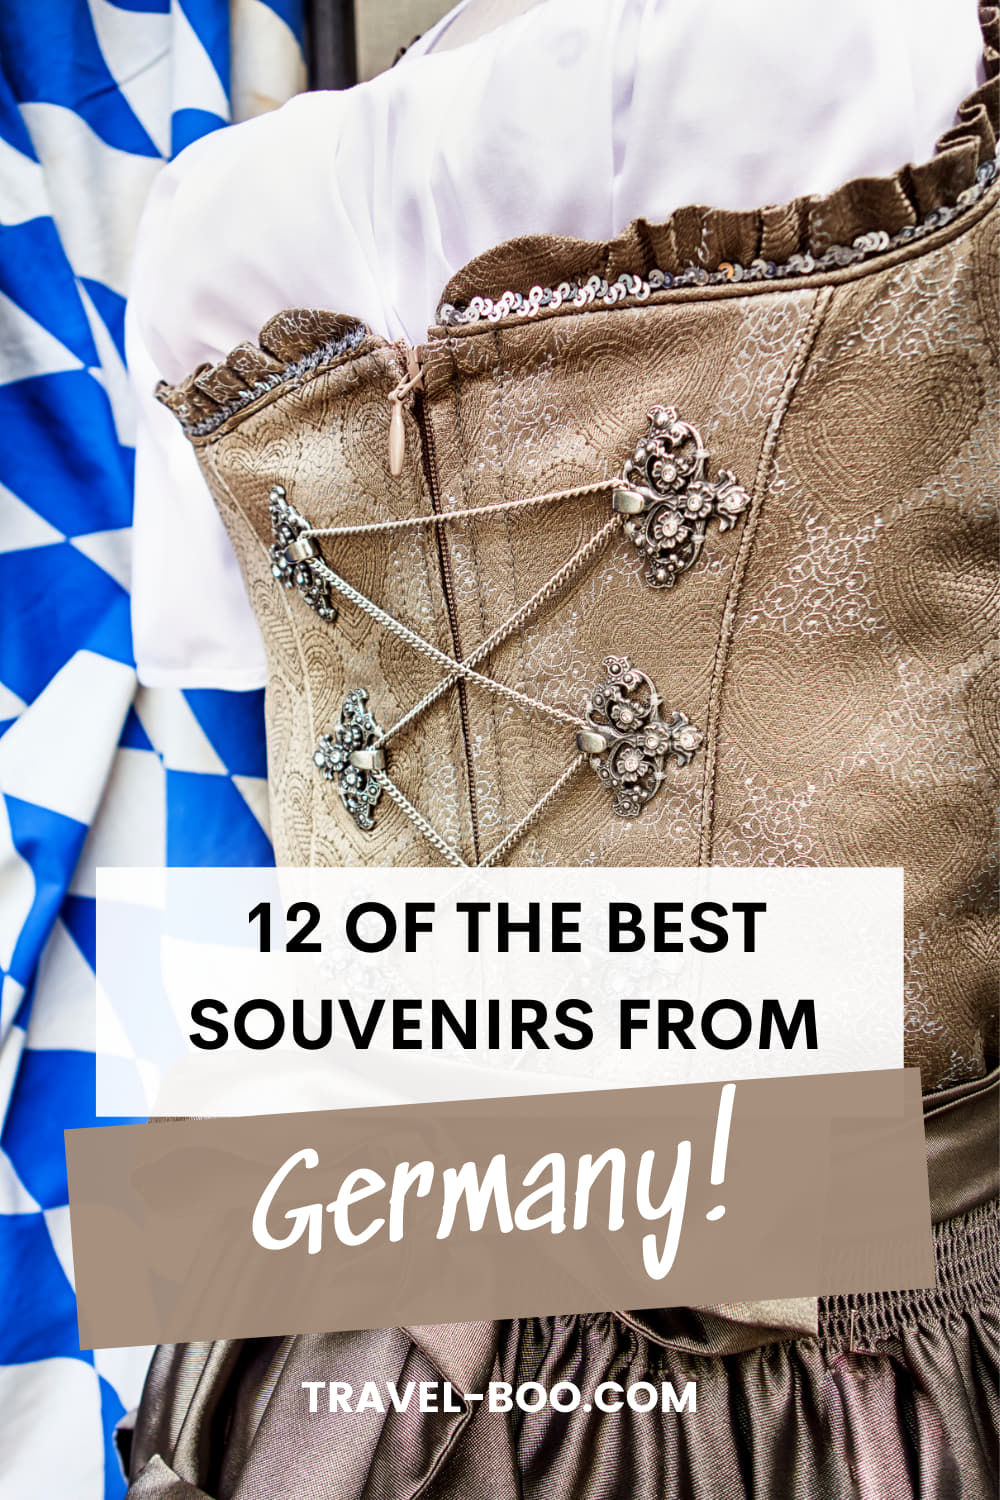 12 Best Souvenirs from Germany - Unique German Gifts!Best German Souvenirs, Souvenirs of Germany, Souvenirs from Germany, German gifts, What to buy from Germany, Things to buy in Germany, German souvenir